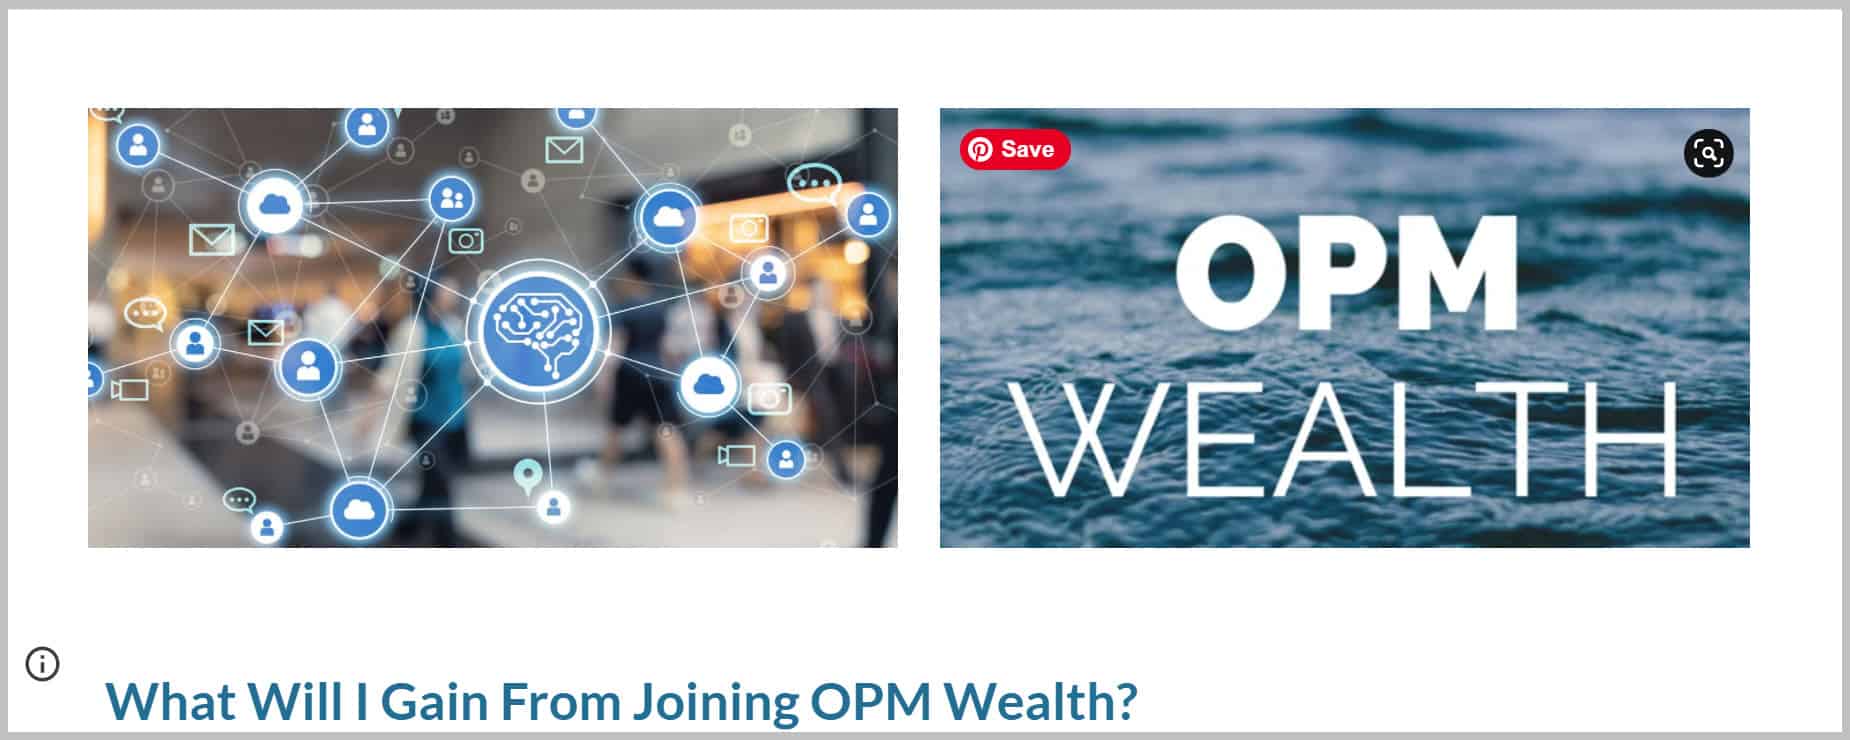 OPM Wealth - How Can I Benefit